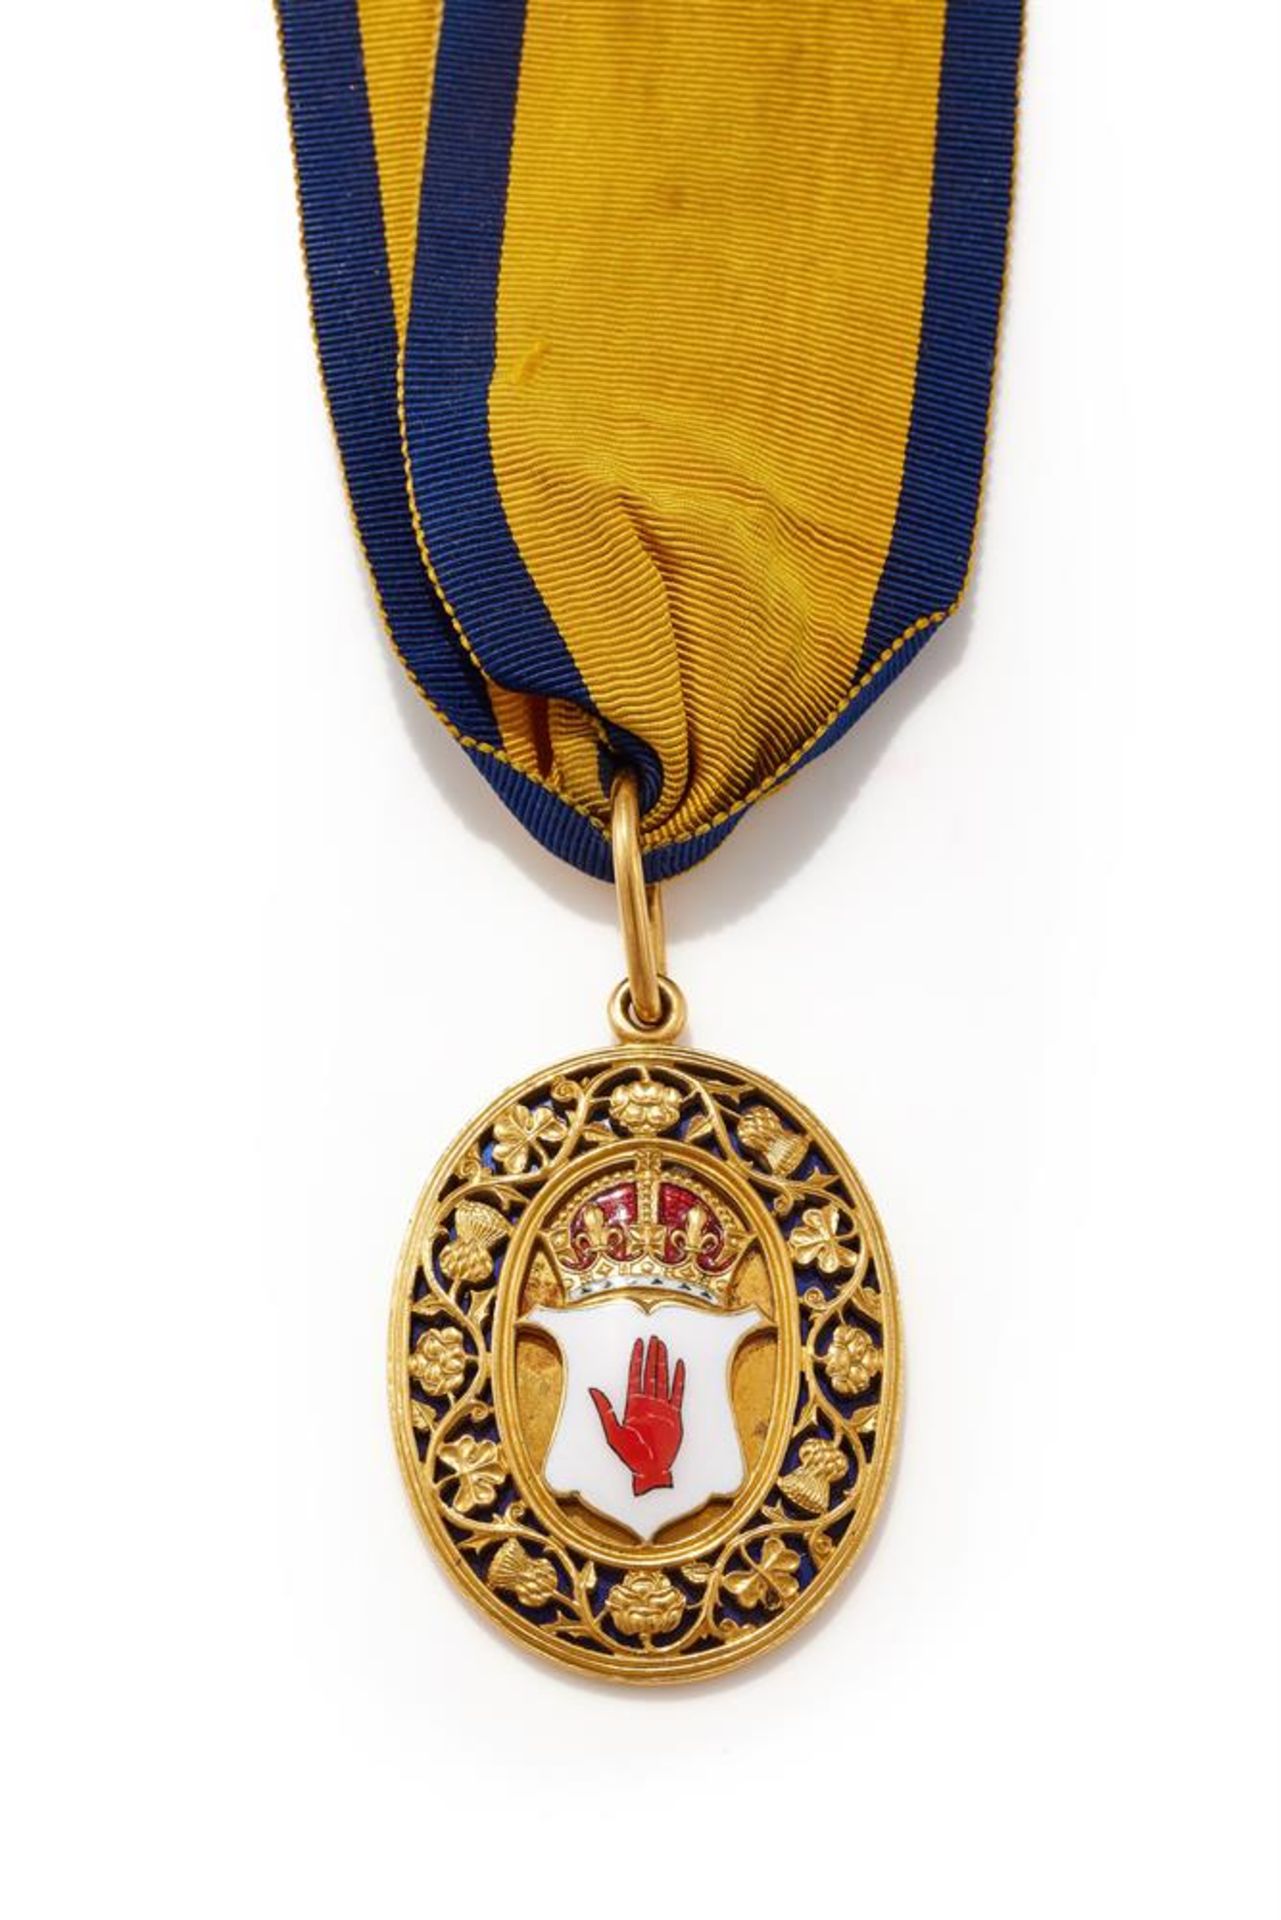 A 22 CARAT GOLD BARONET BADGE AWARDED TO SIR GEORGE LOYD COURTHOPE, 1ST BARON COUTHORPE, LONDON 1909